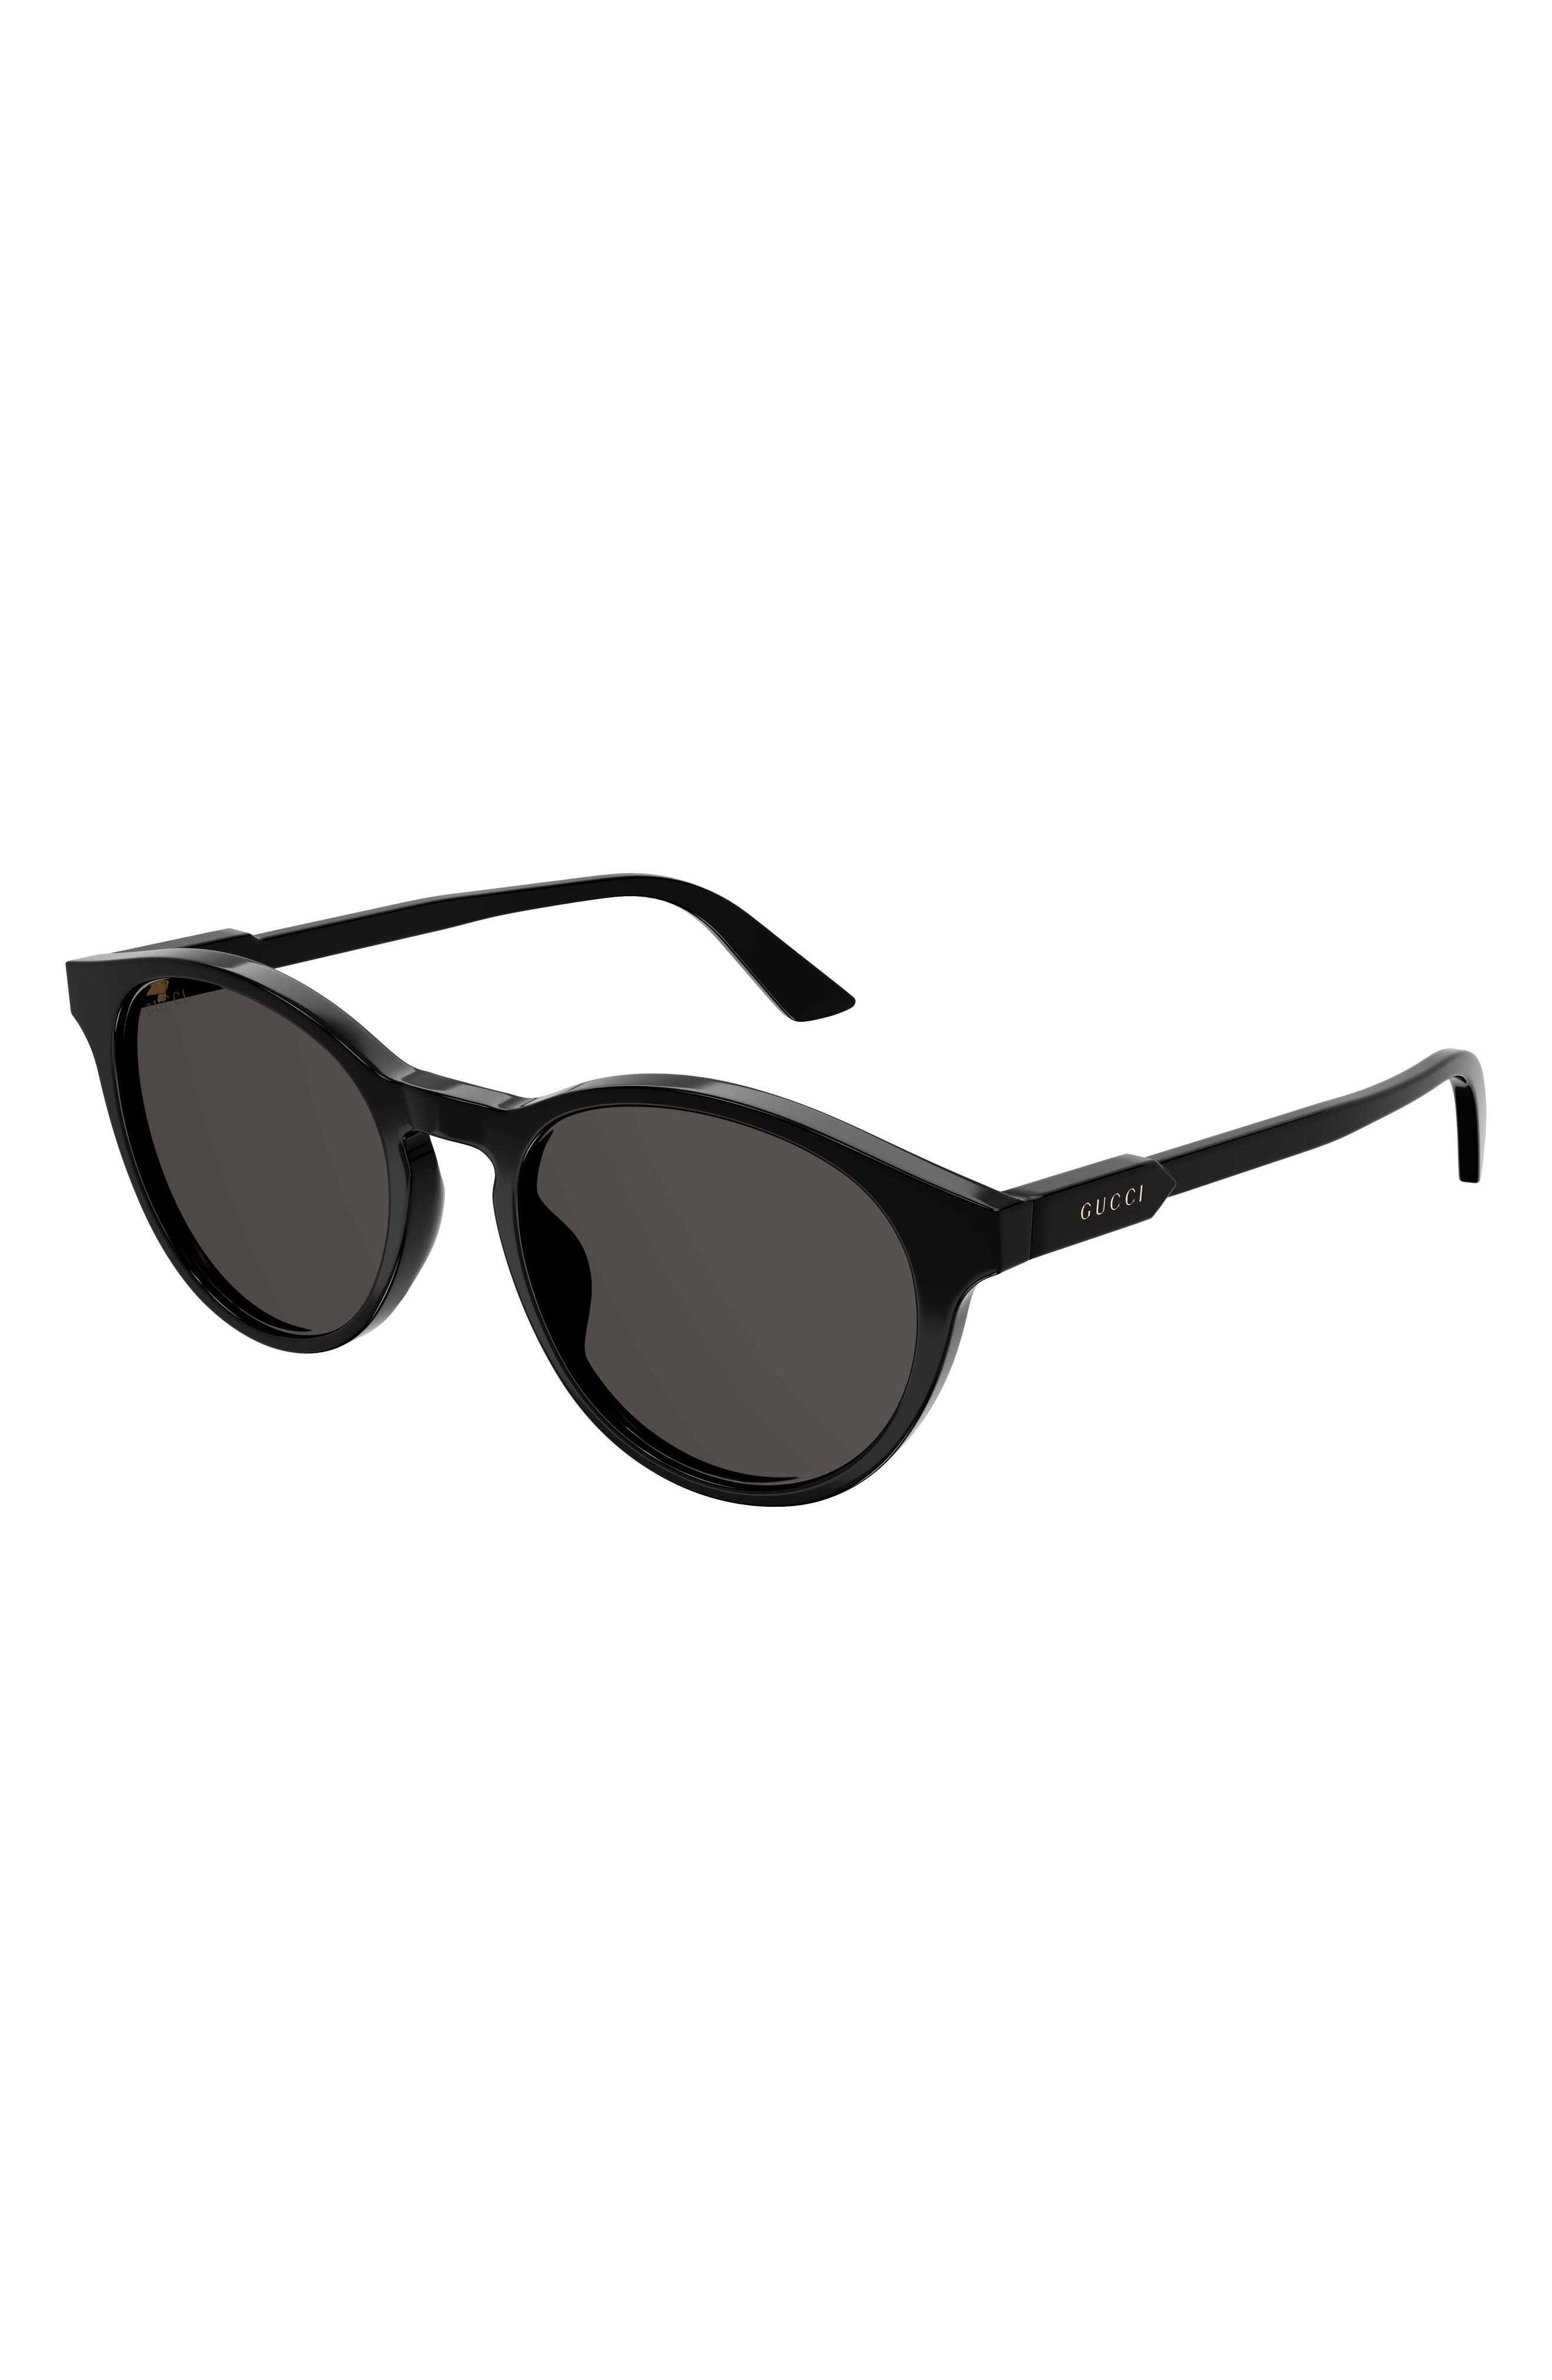 Gucci 52mm Round Sunglasses in Black at Nordstrom